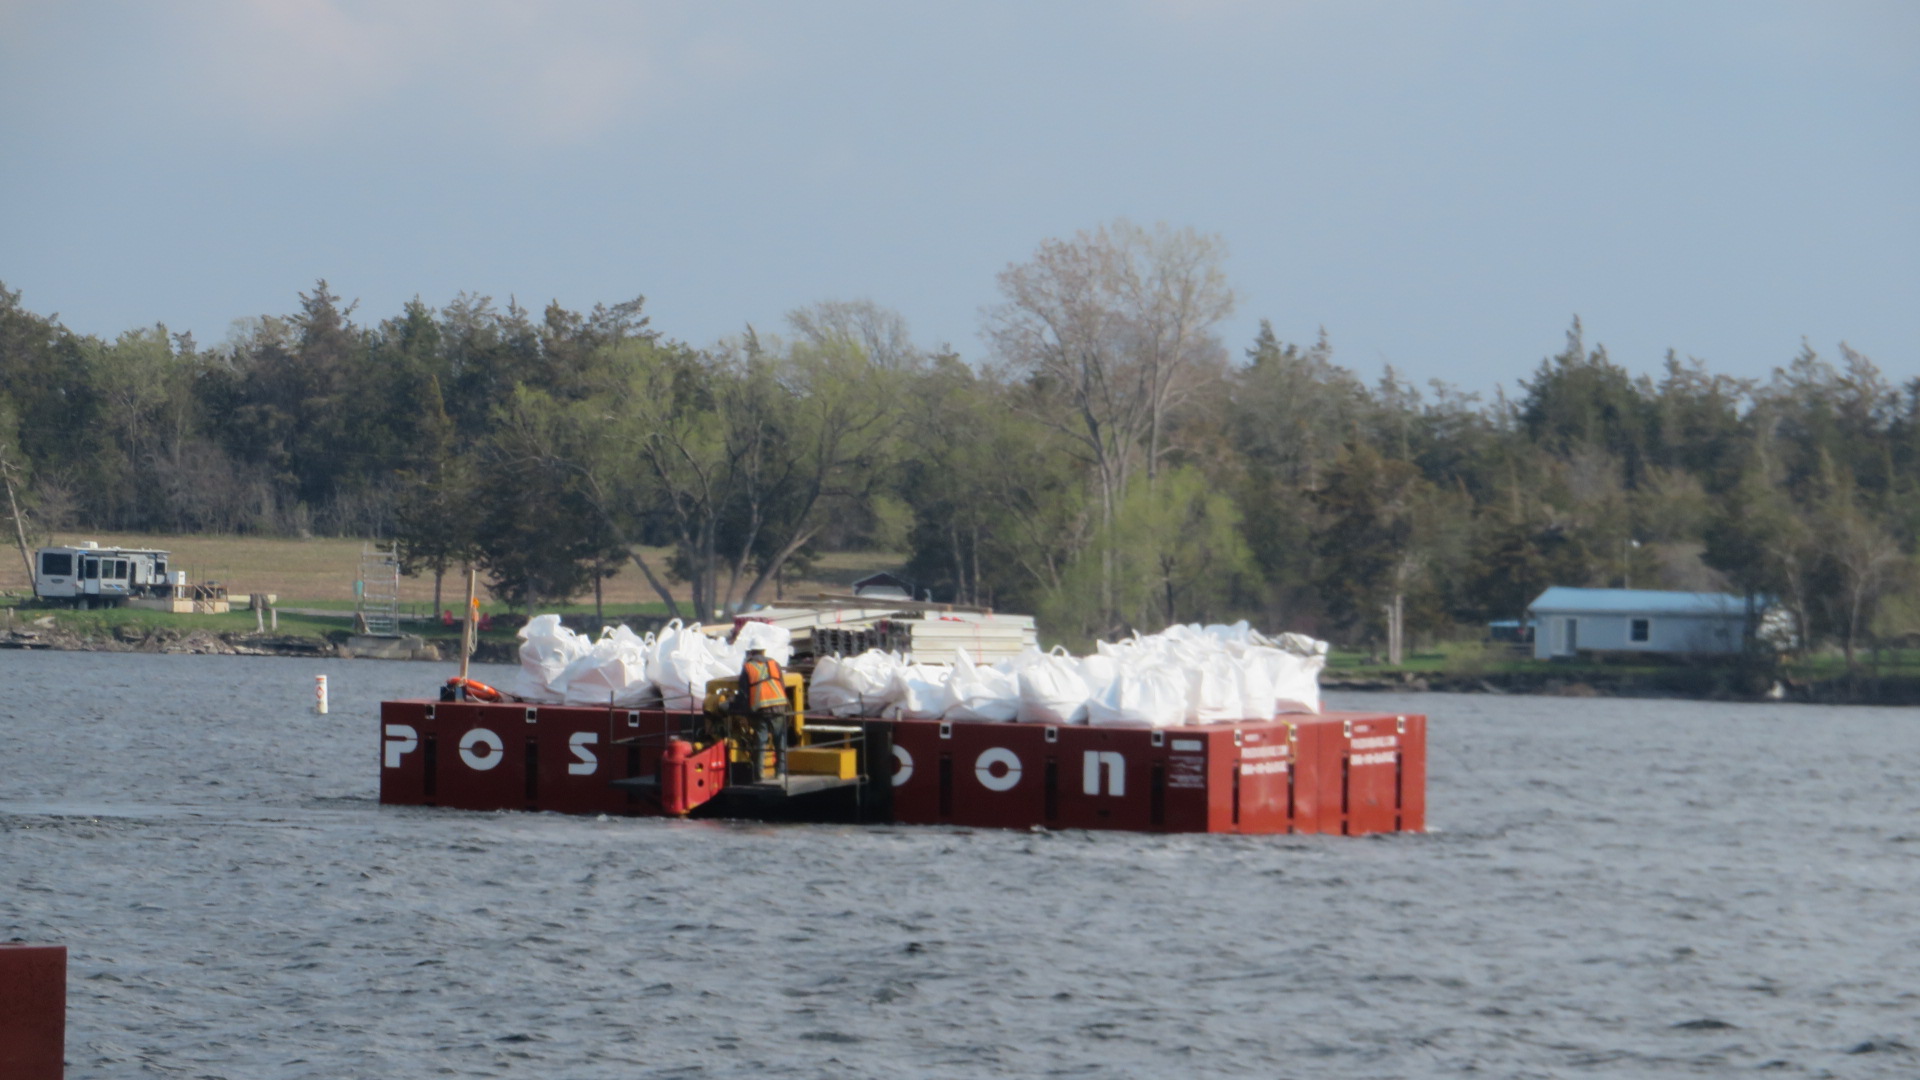 Service barge removing bags of debris to the dock